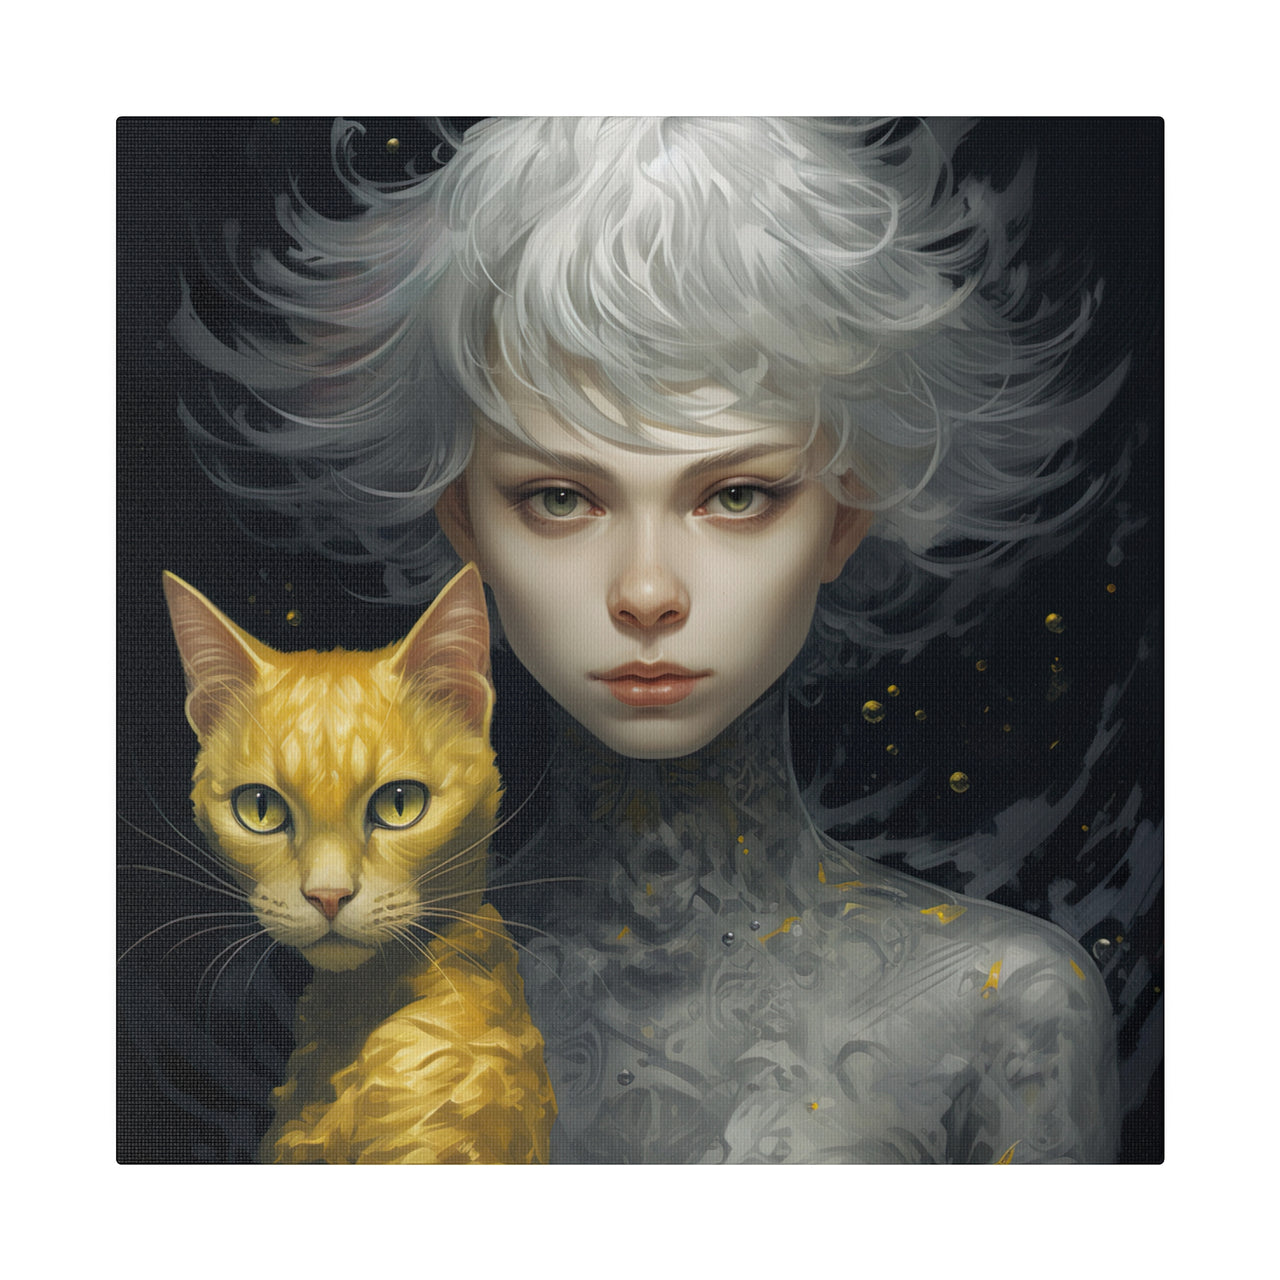 Woman Holding a Gold Cat on Canvas Art